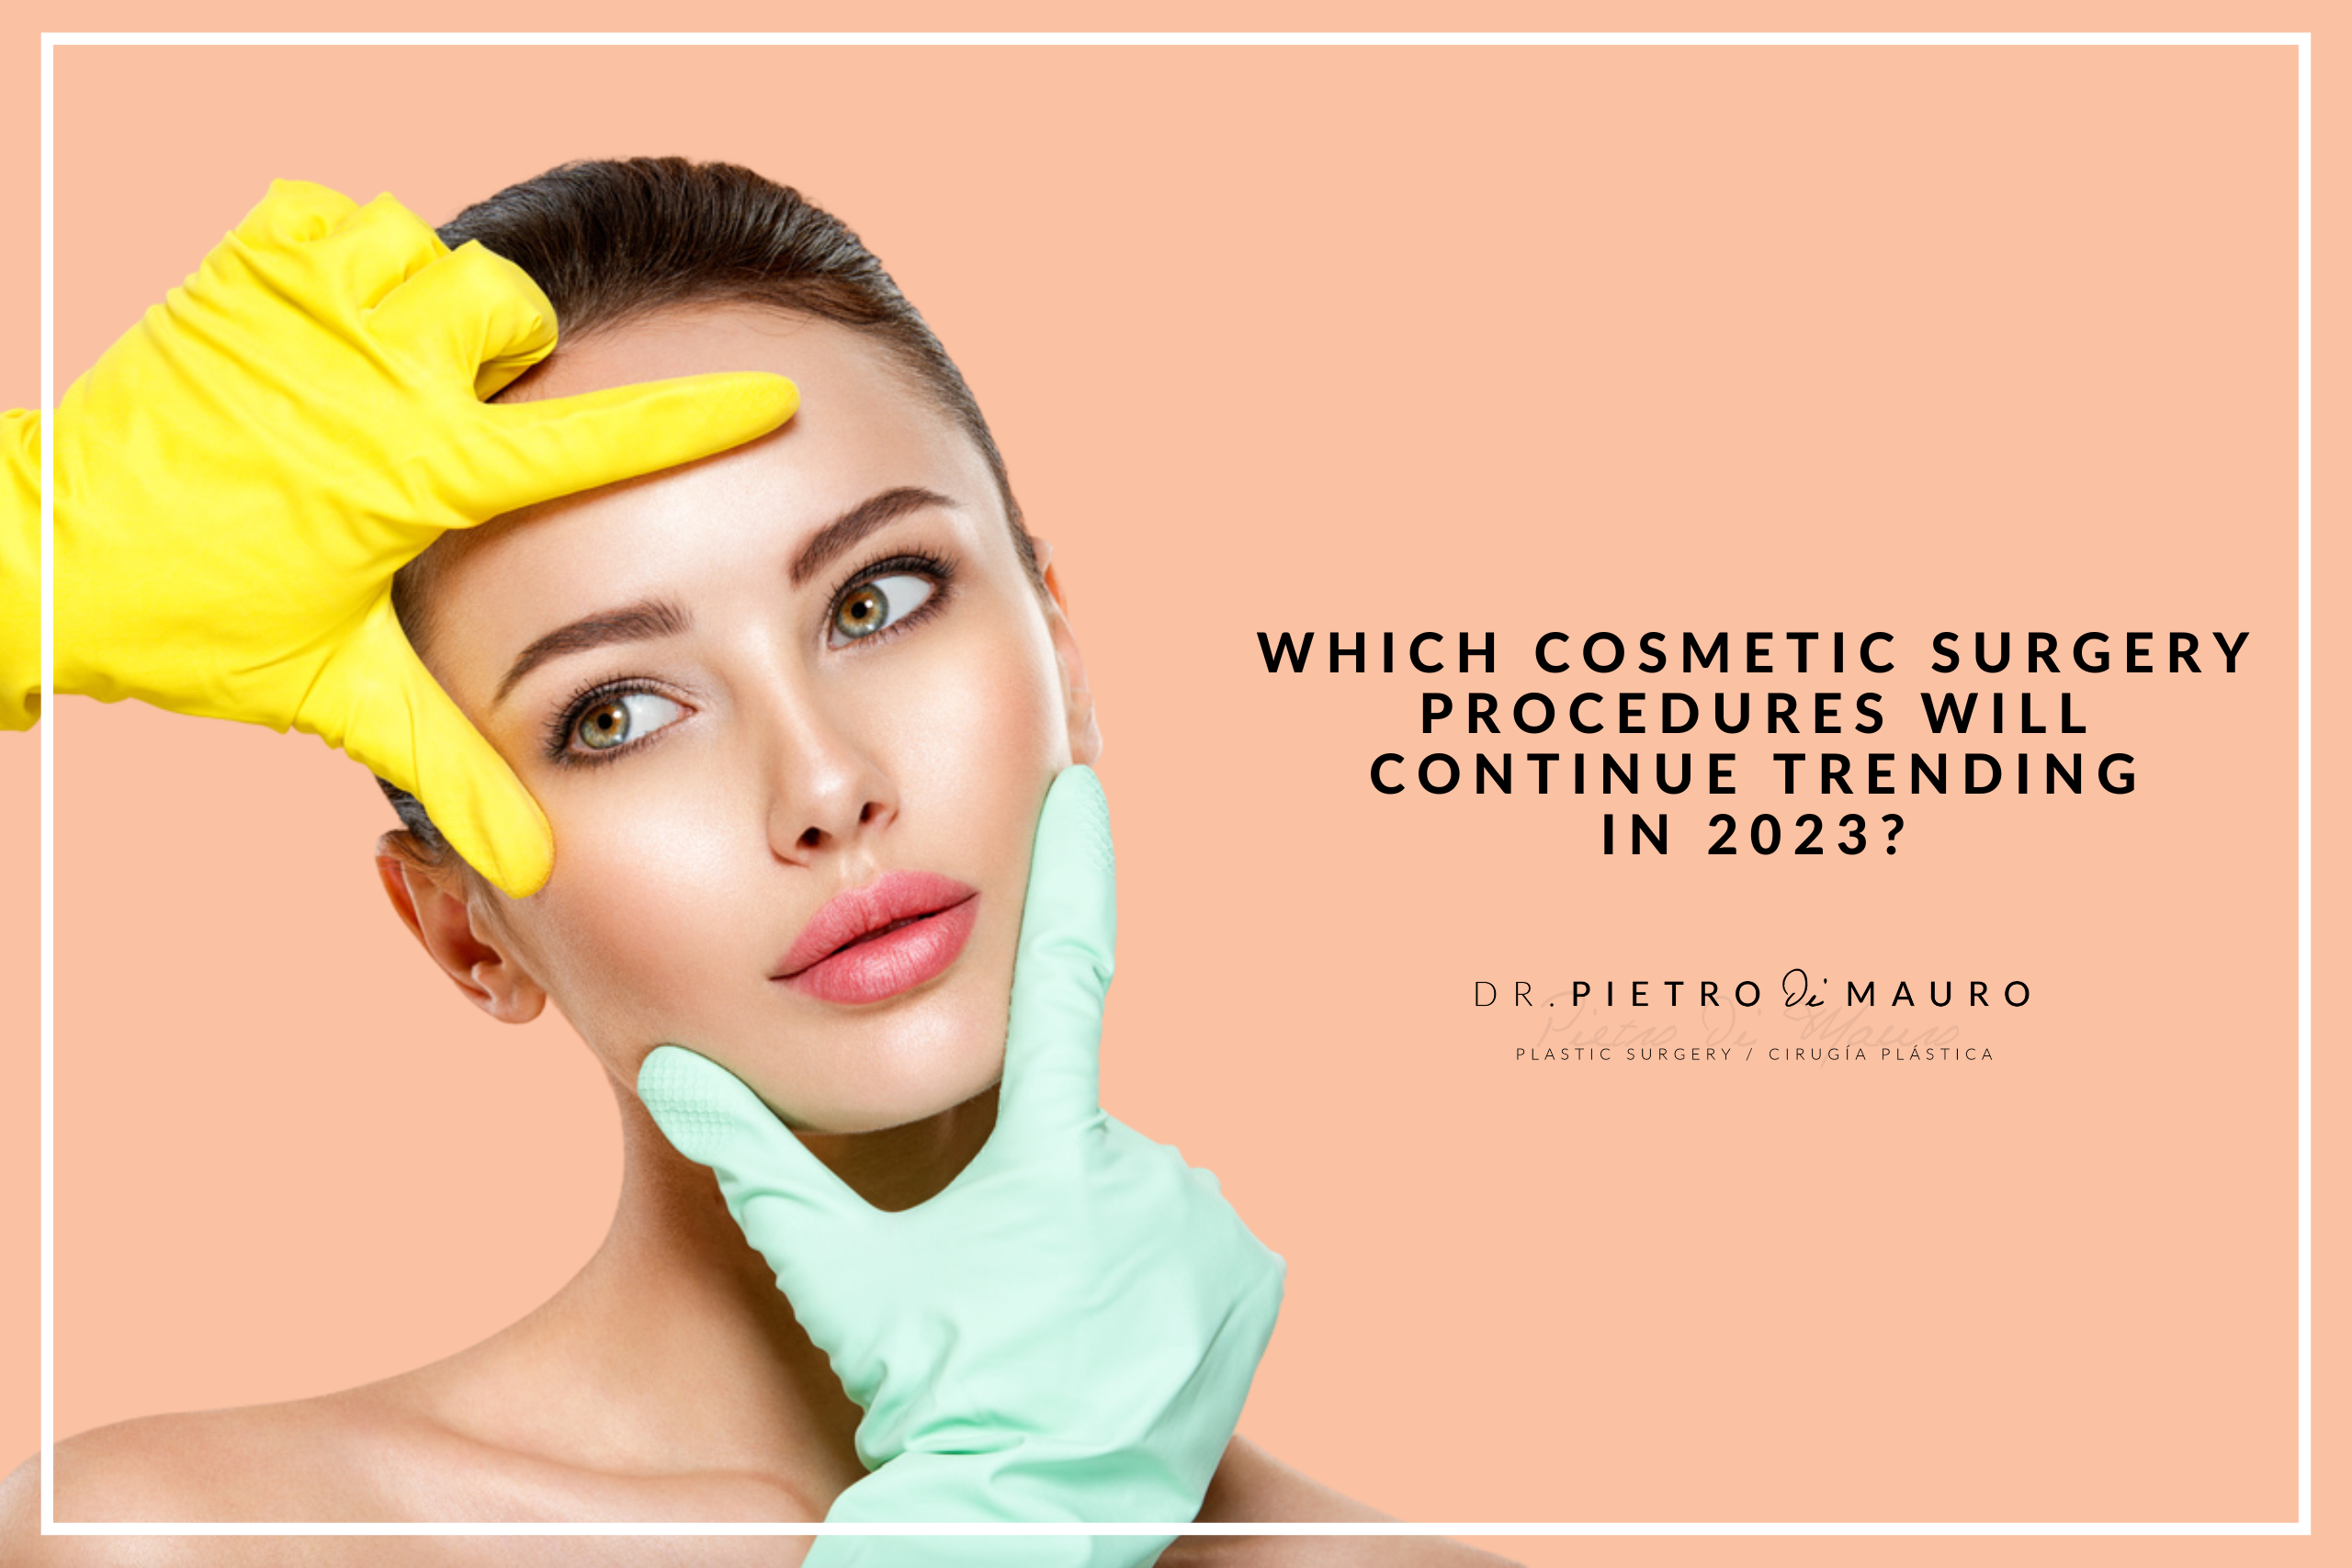 Which cosmetic surgery procedures will continue trending in 2023? - Dr. Pietro di Mauro